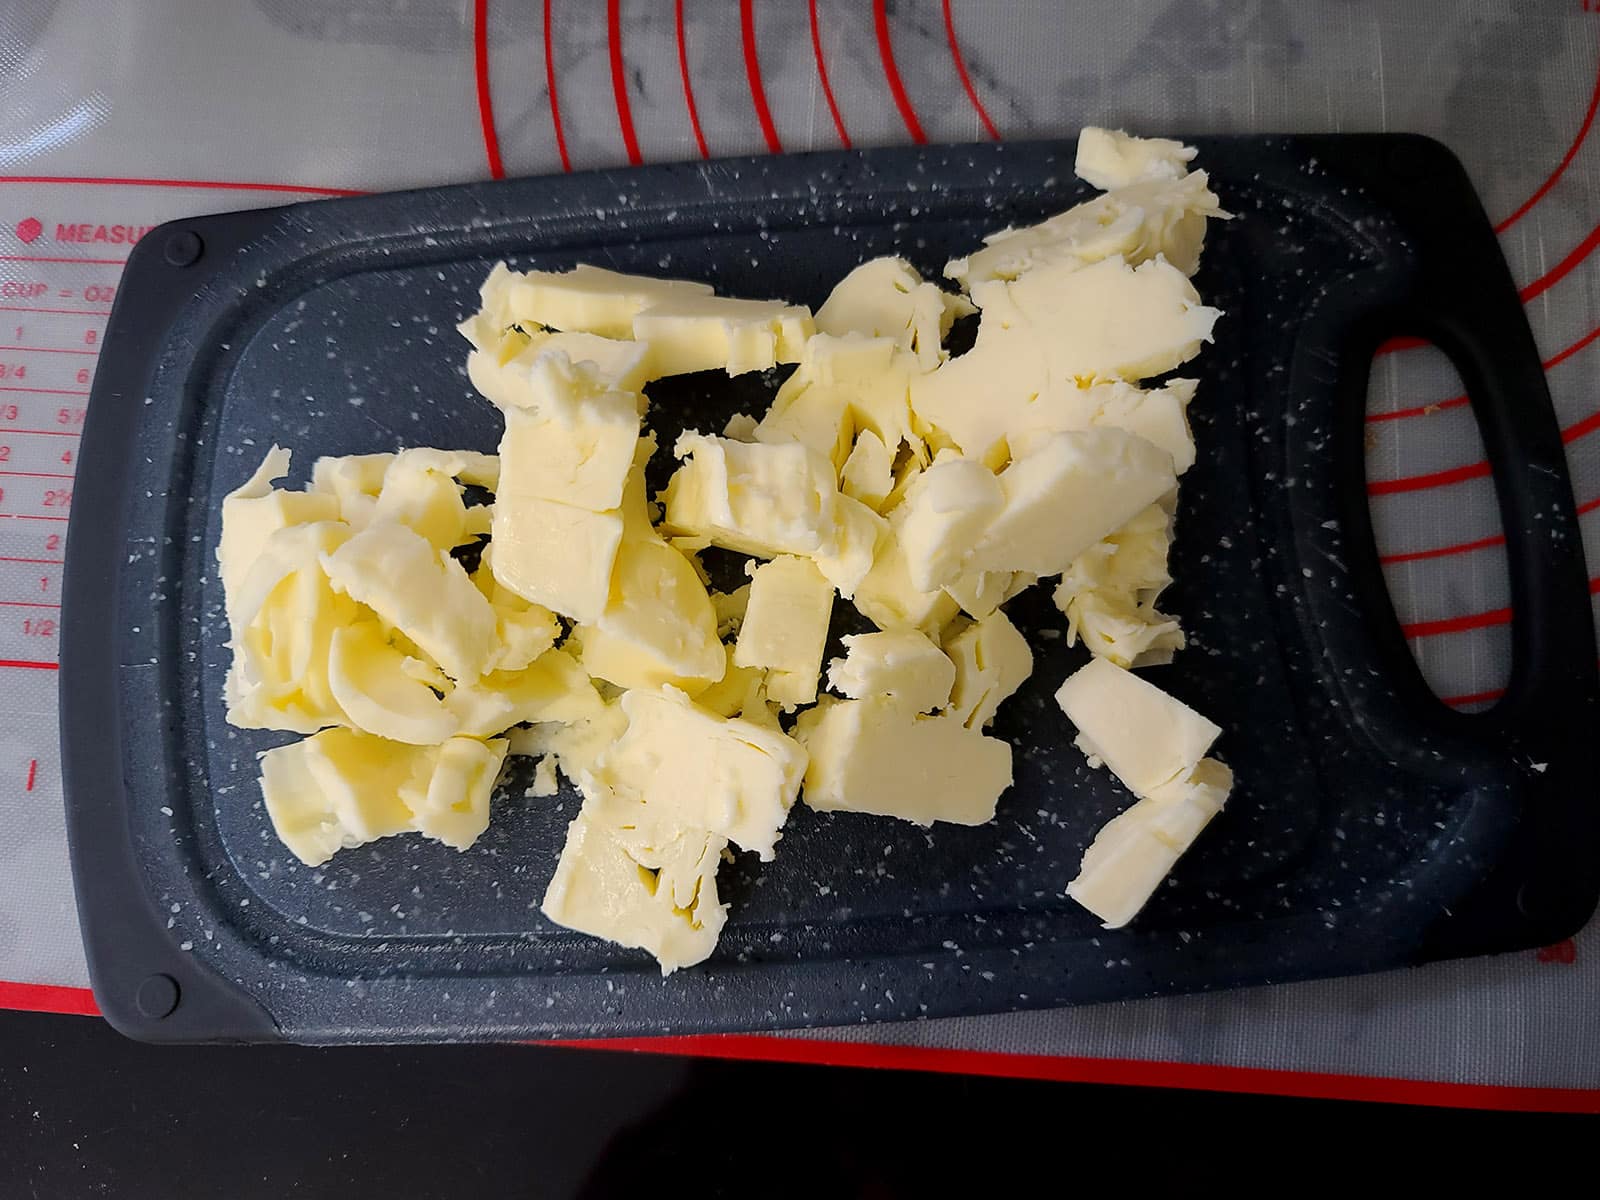 The butter, cut up into small pieces.